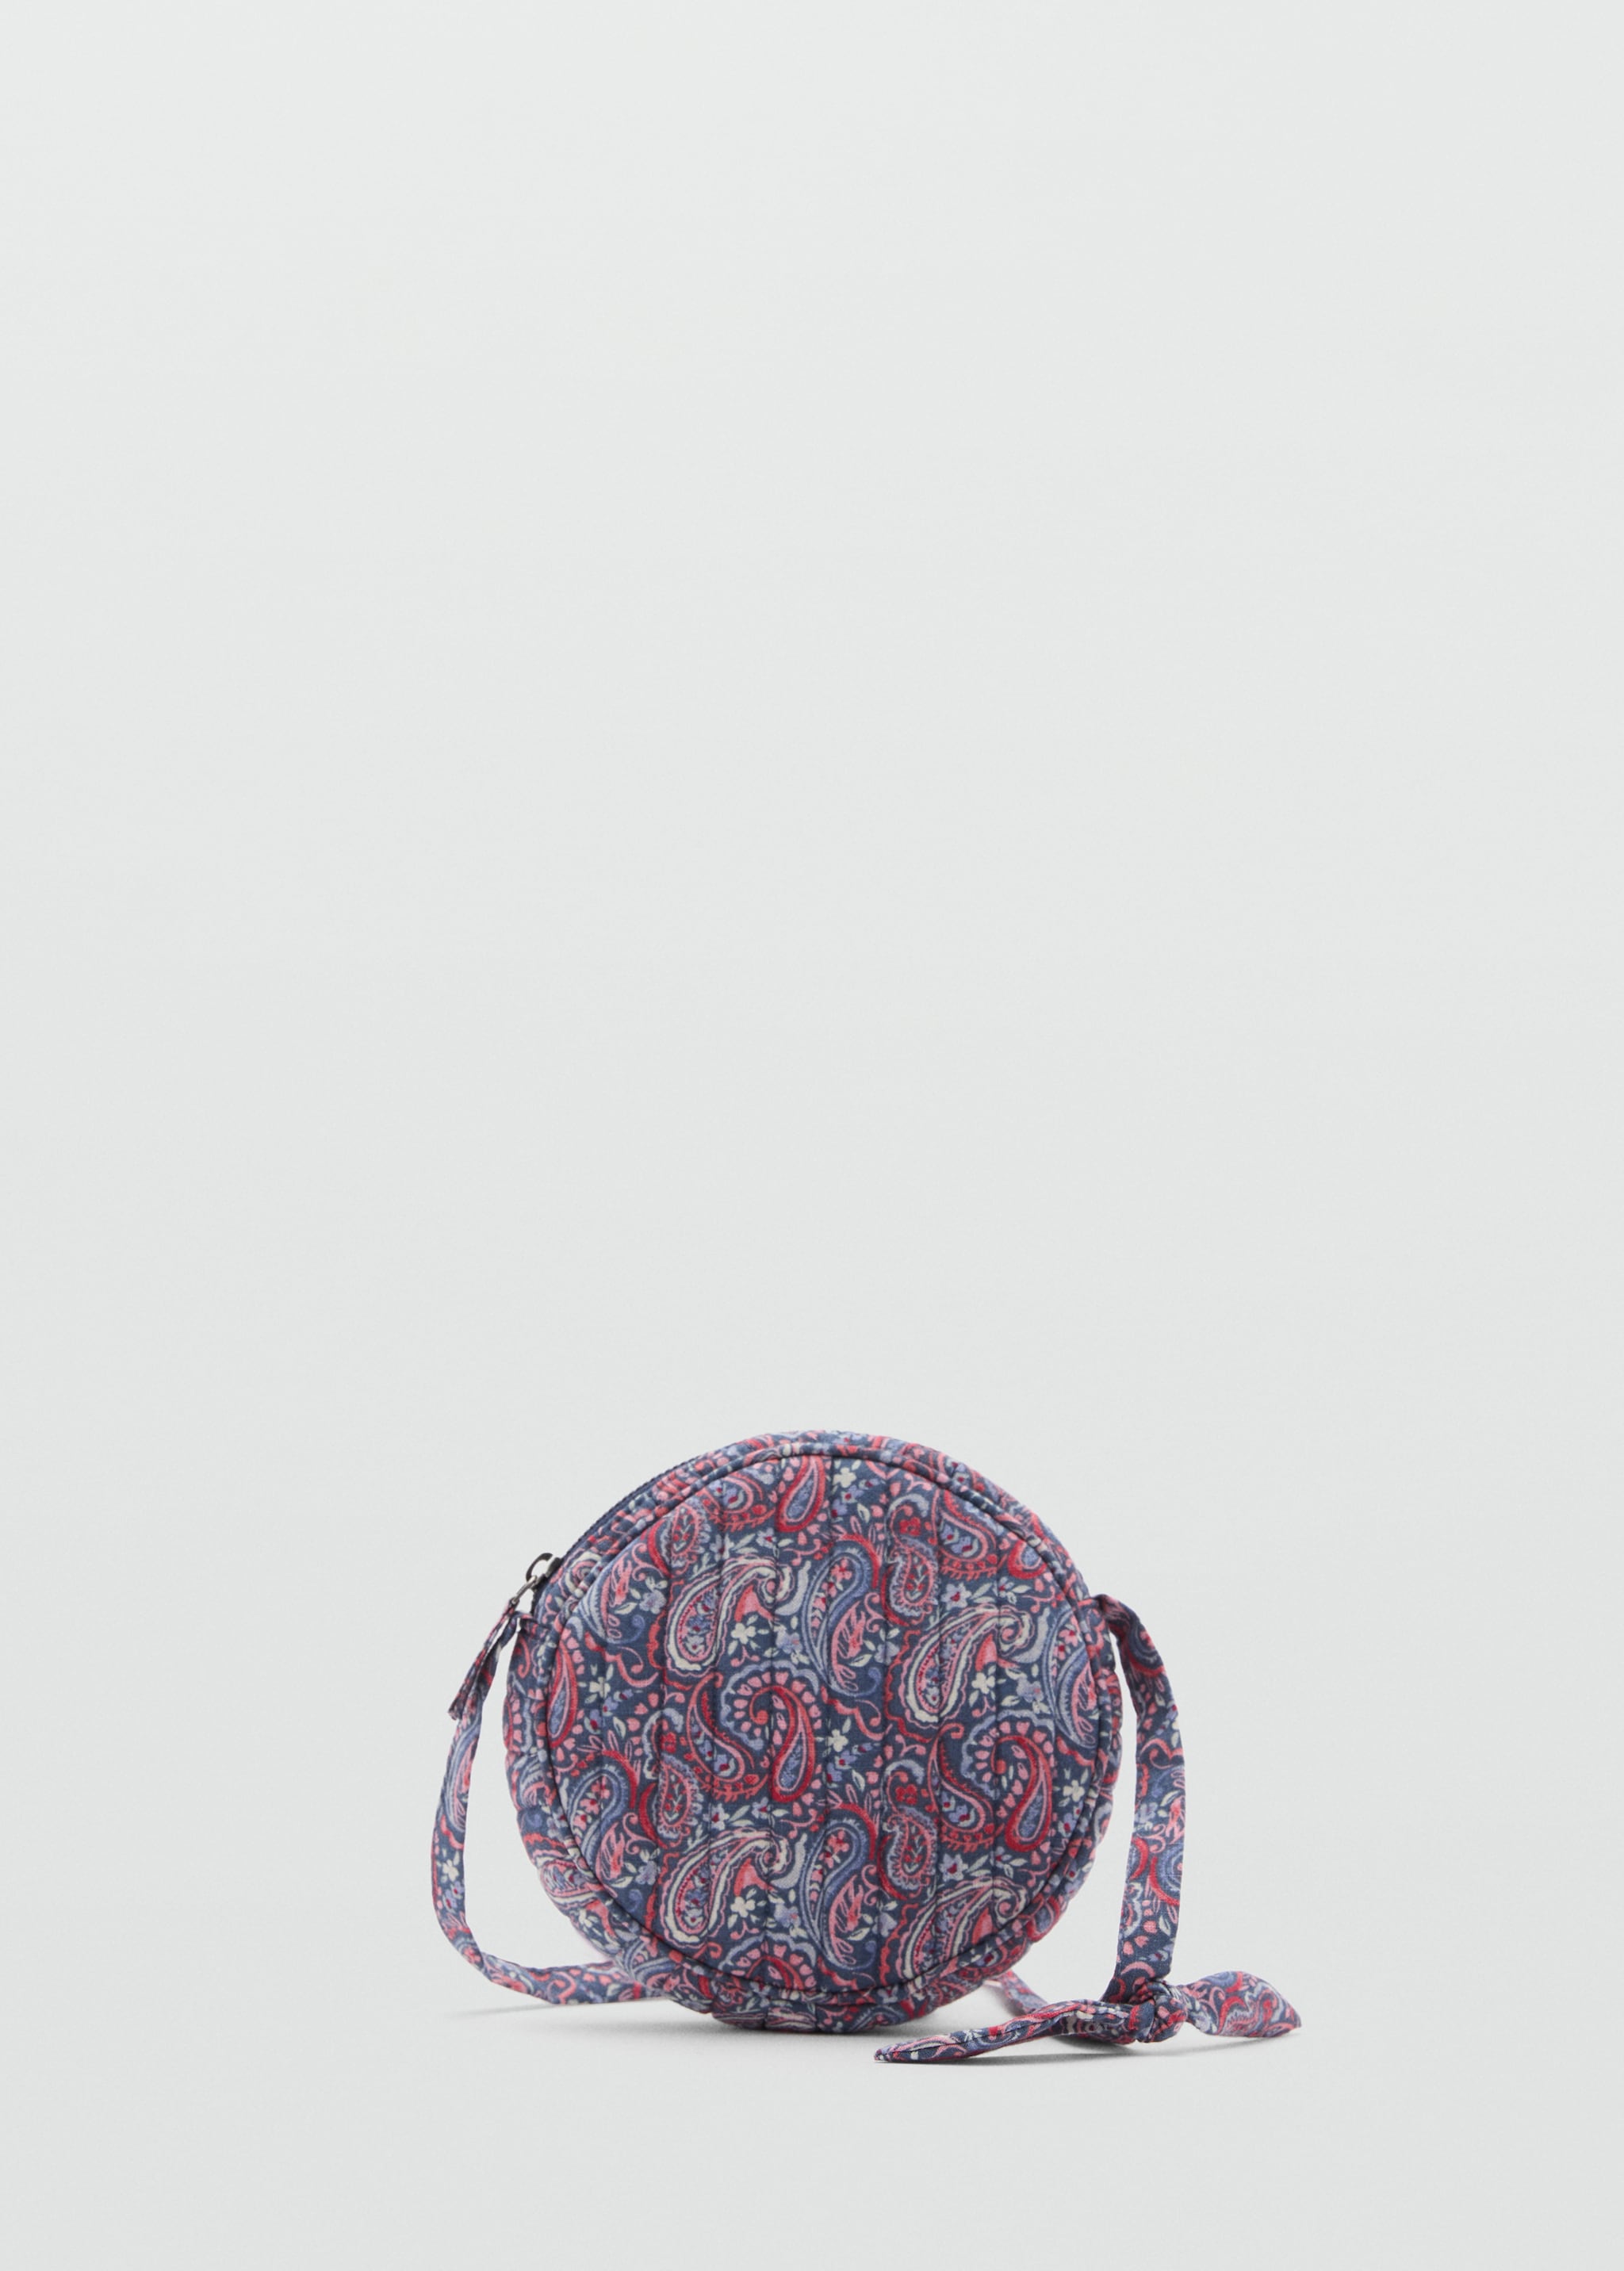 Printed round bag - Article without model